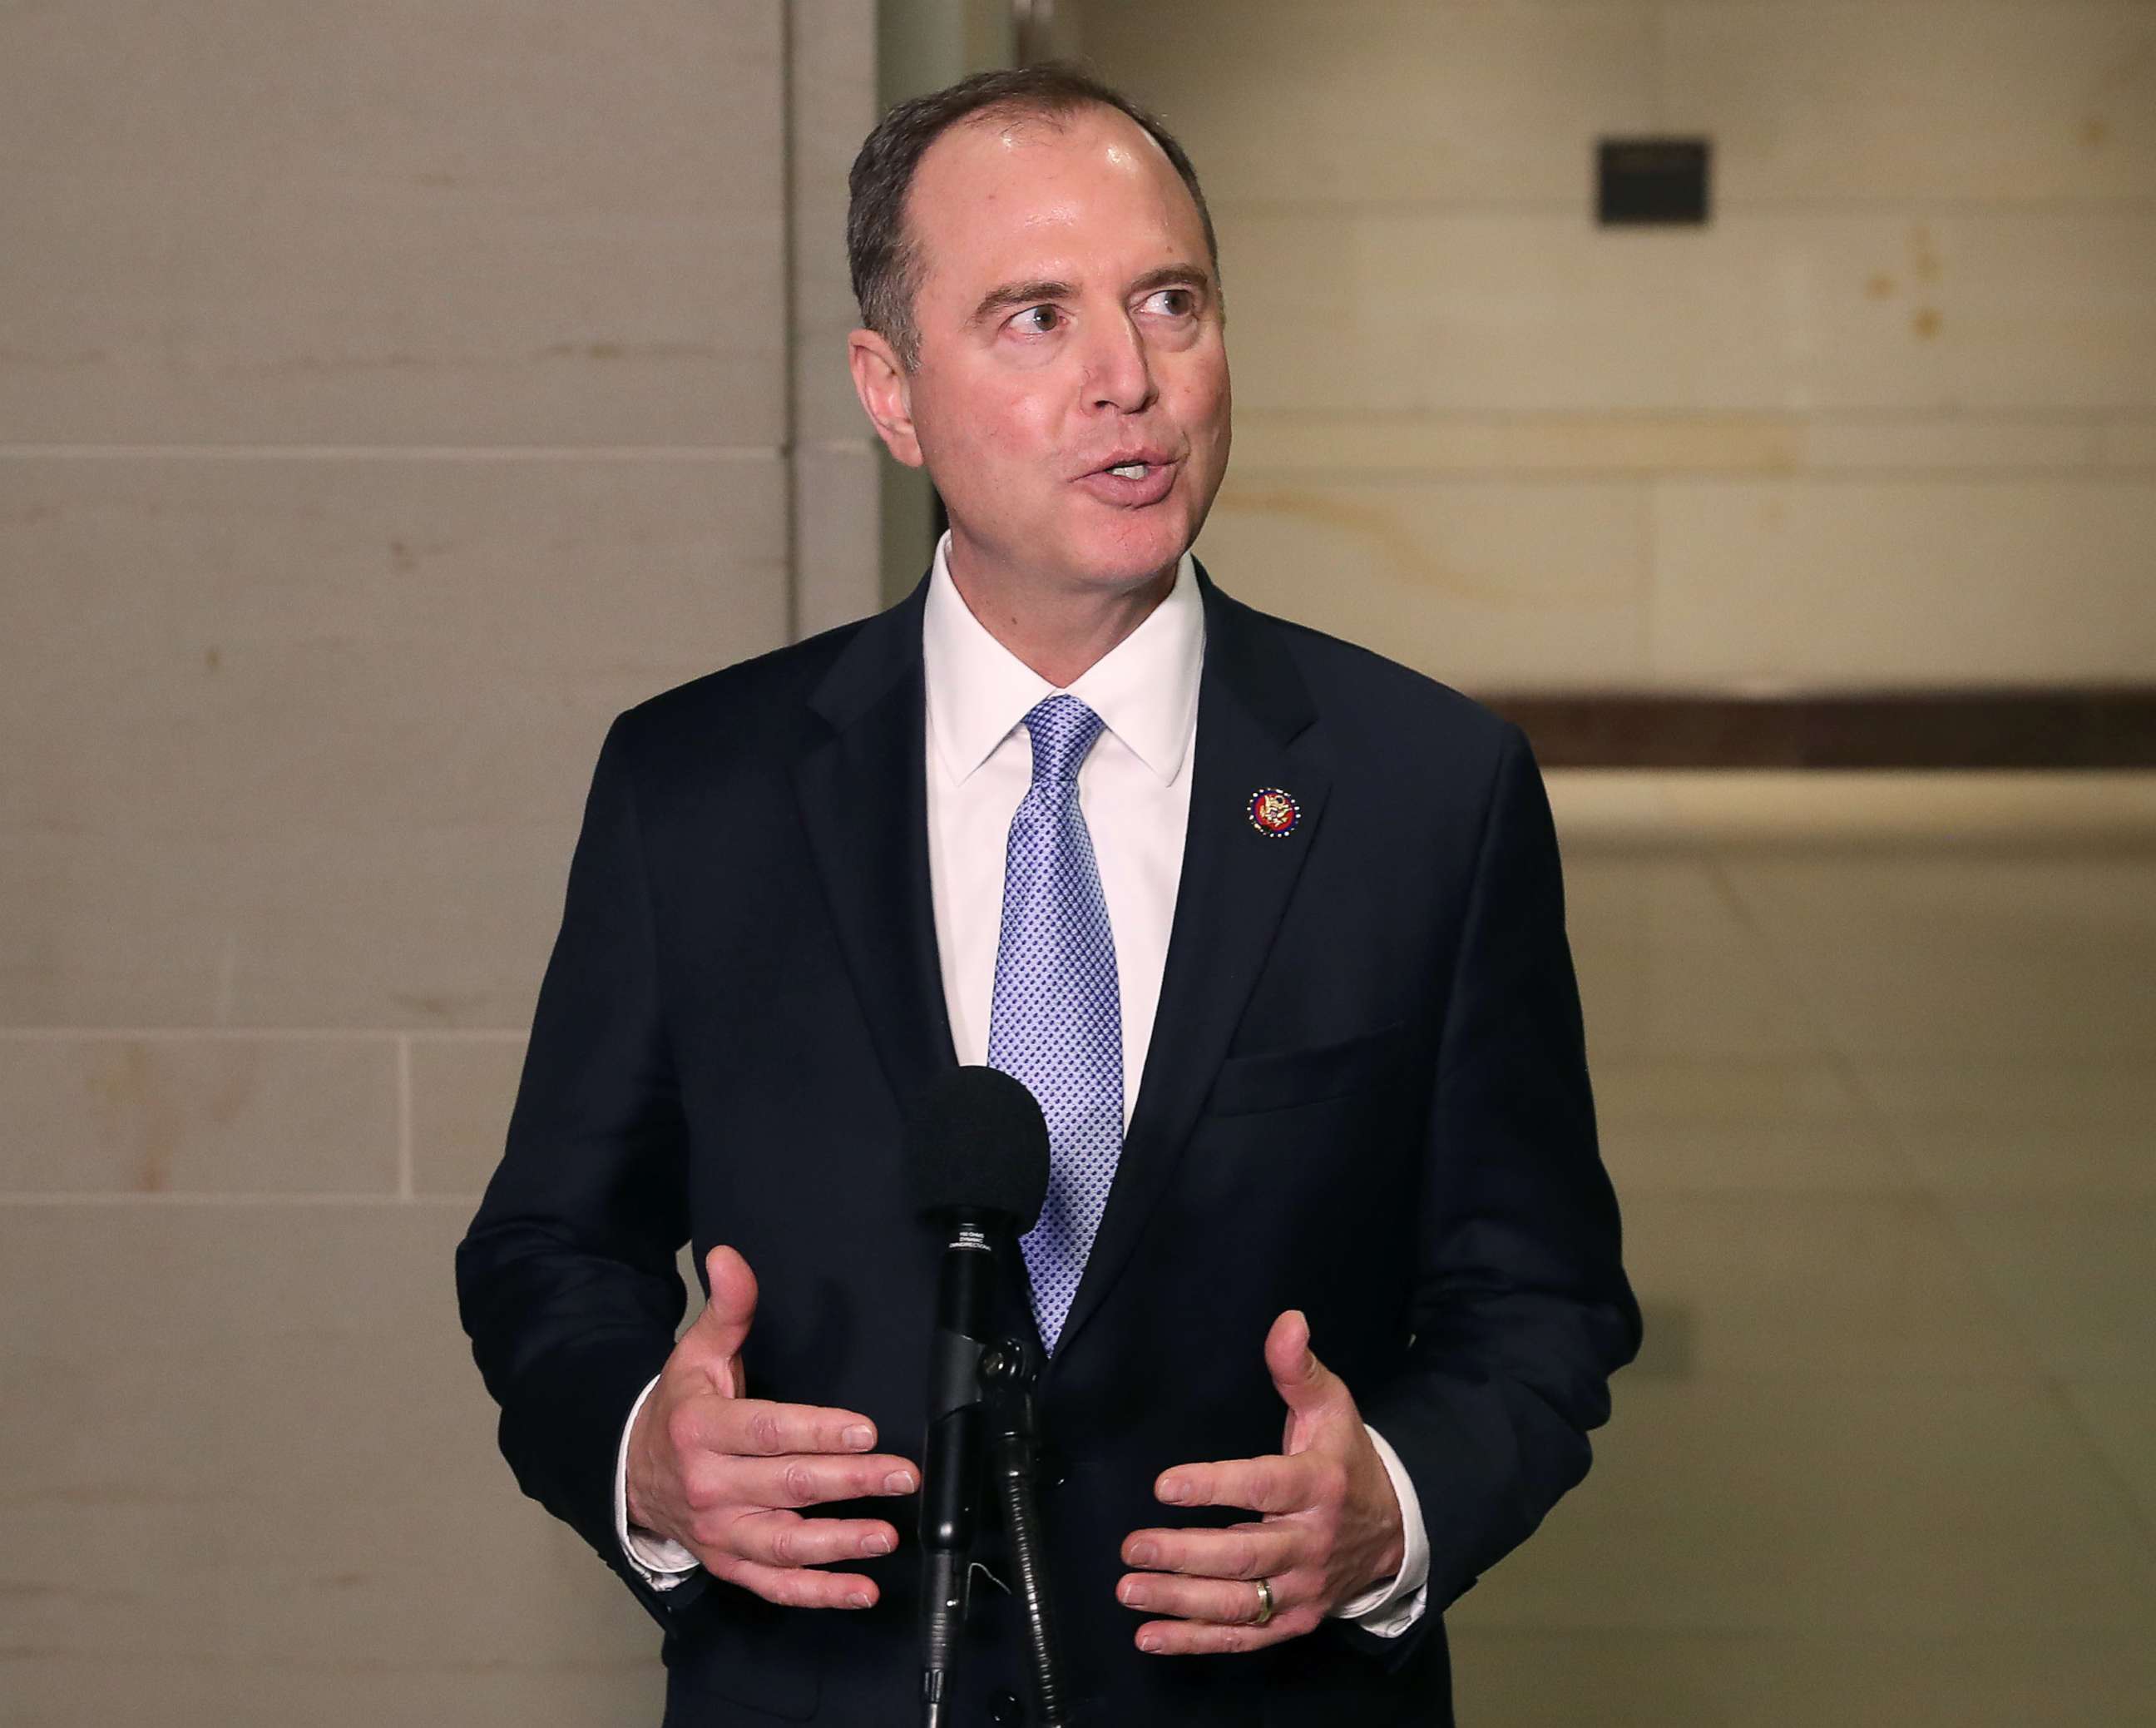 PHOTO: Chairman Adam Schiff speaks to the media at the Capitol in Washington D.C., March 6, 2019.